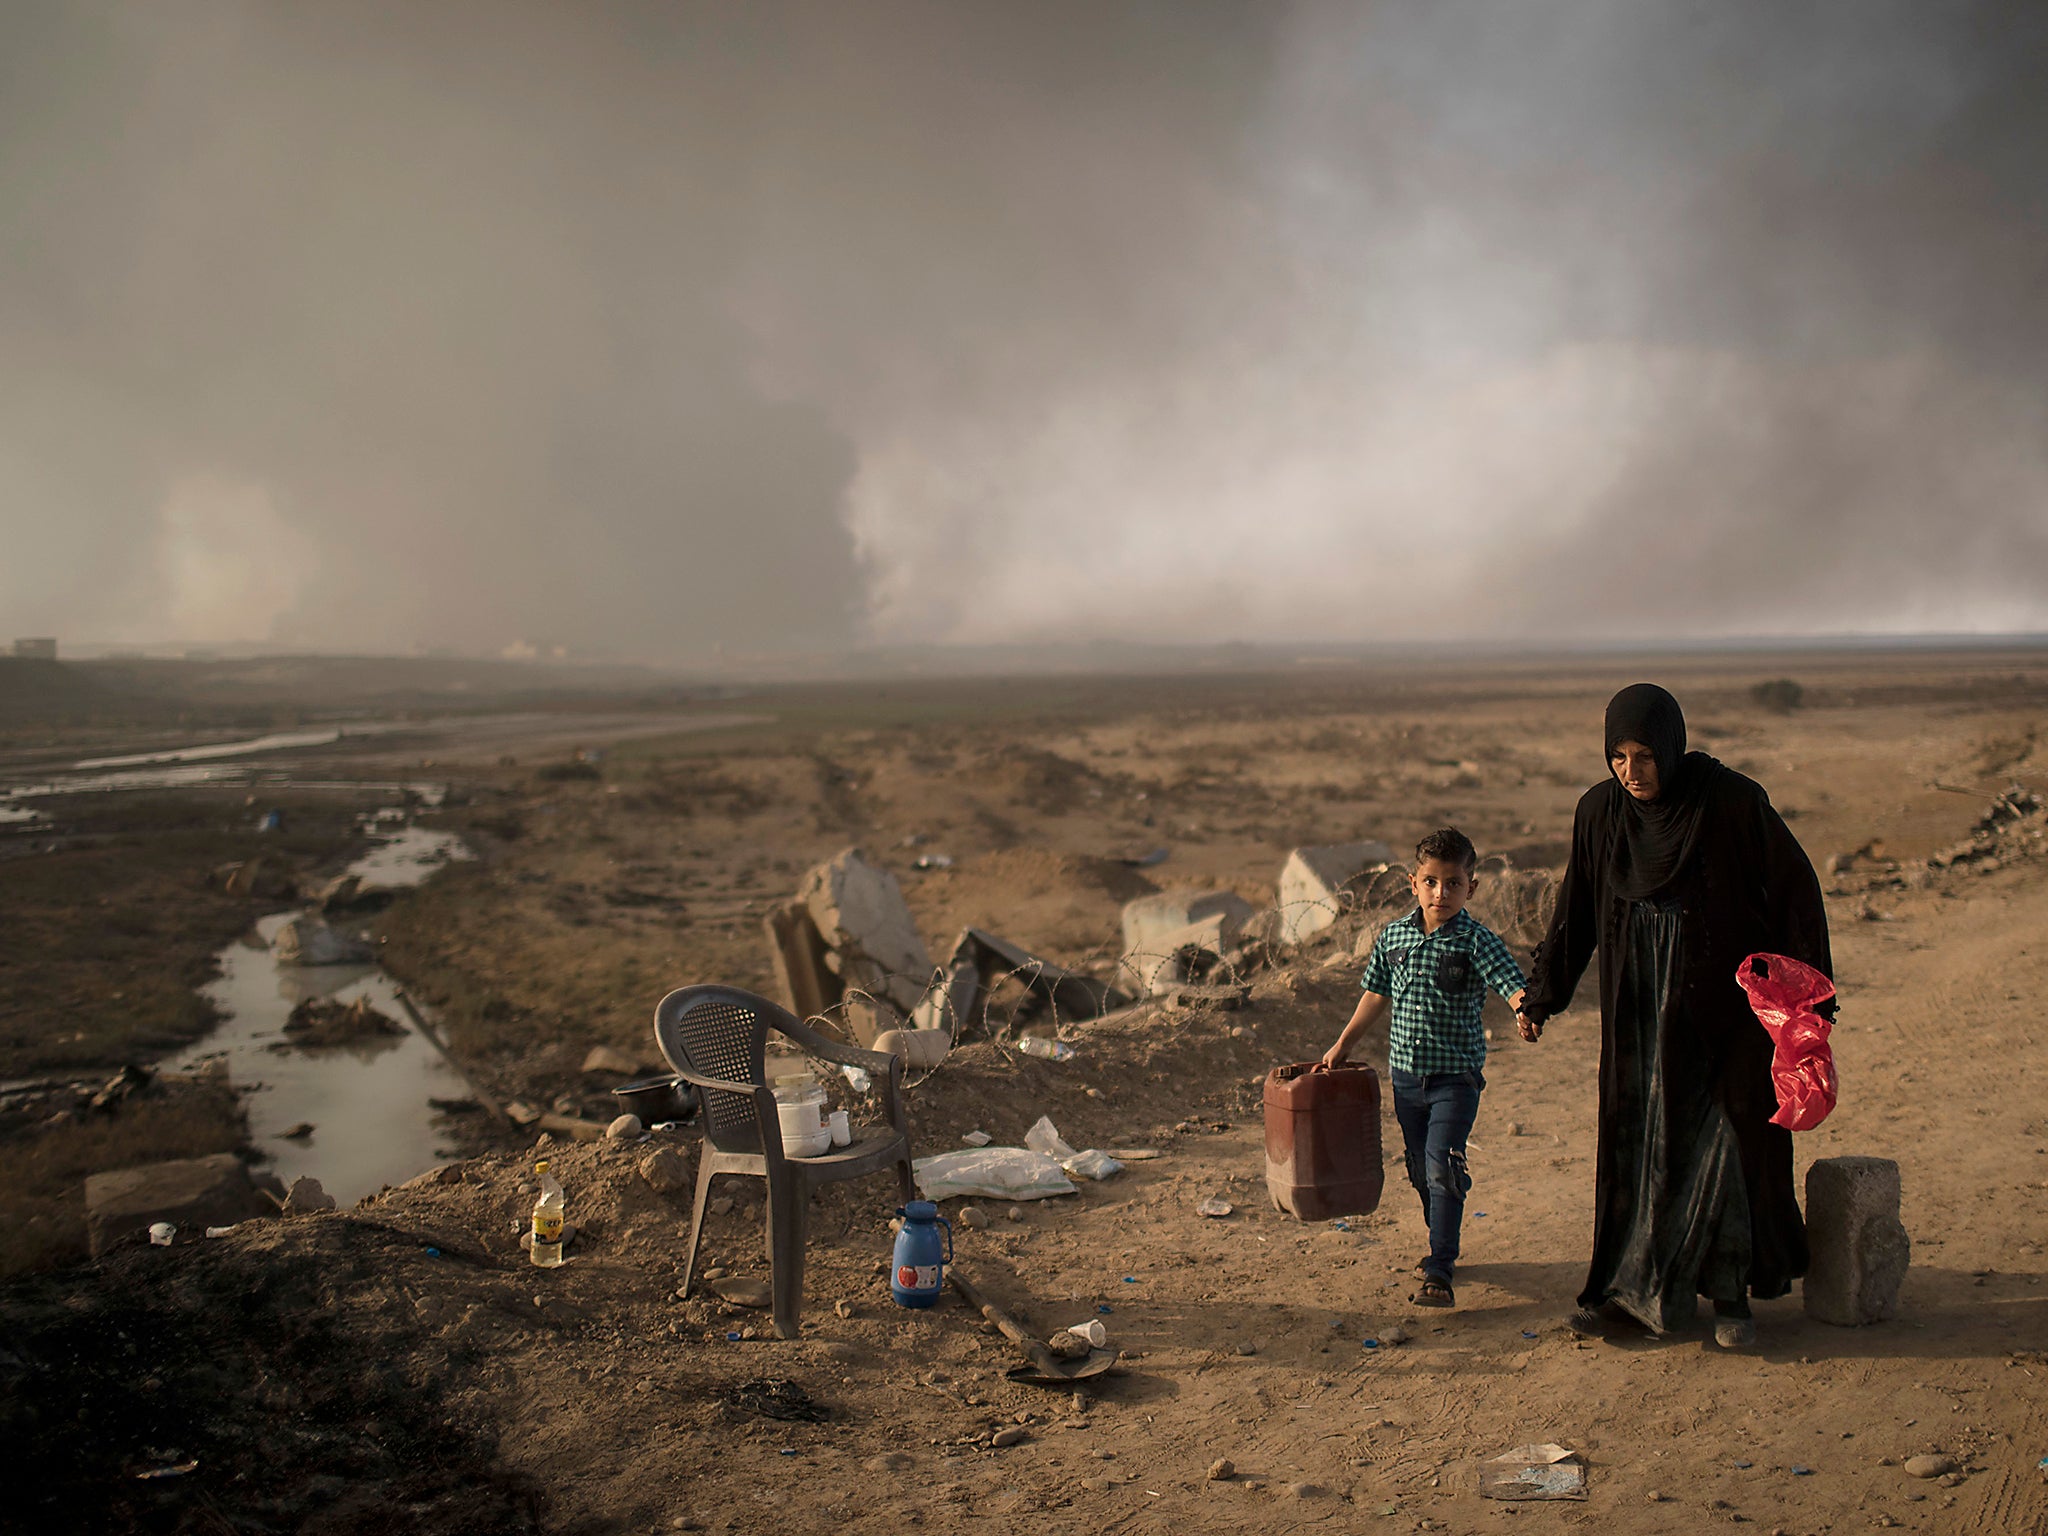 More than 45,000 people have been displaced by the Mosul offensive so far, with aid agencies warning the figure could rise to 700,000